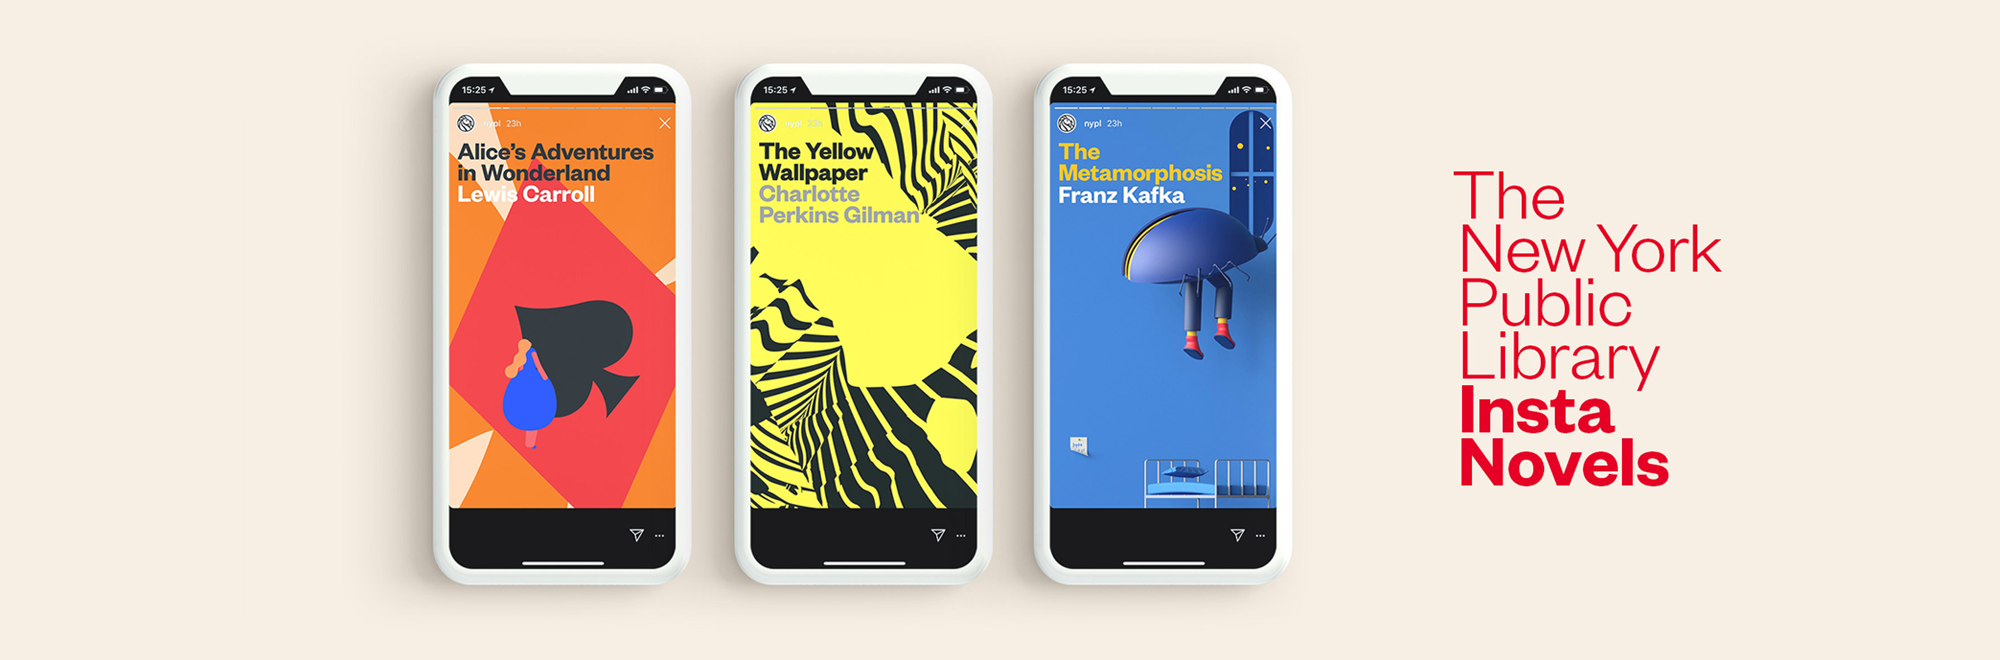 How NYC Public Library launched Insta Novels to remind people that there are no actual stories on Instagram Stories